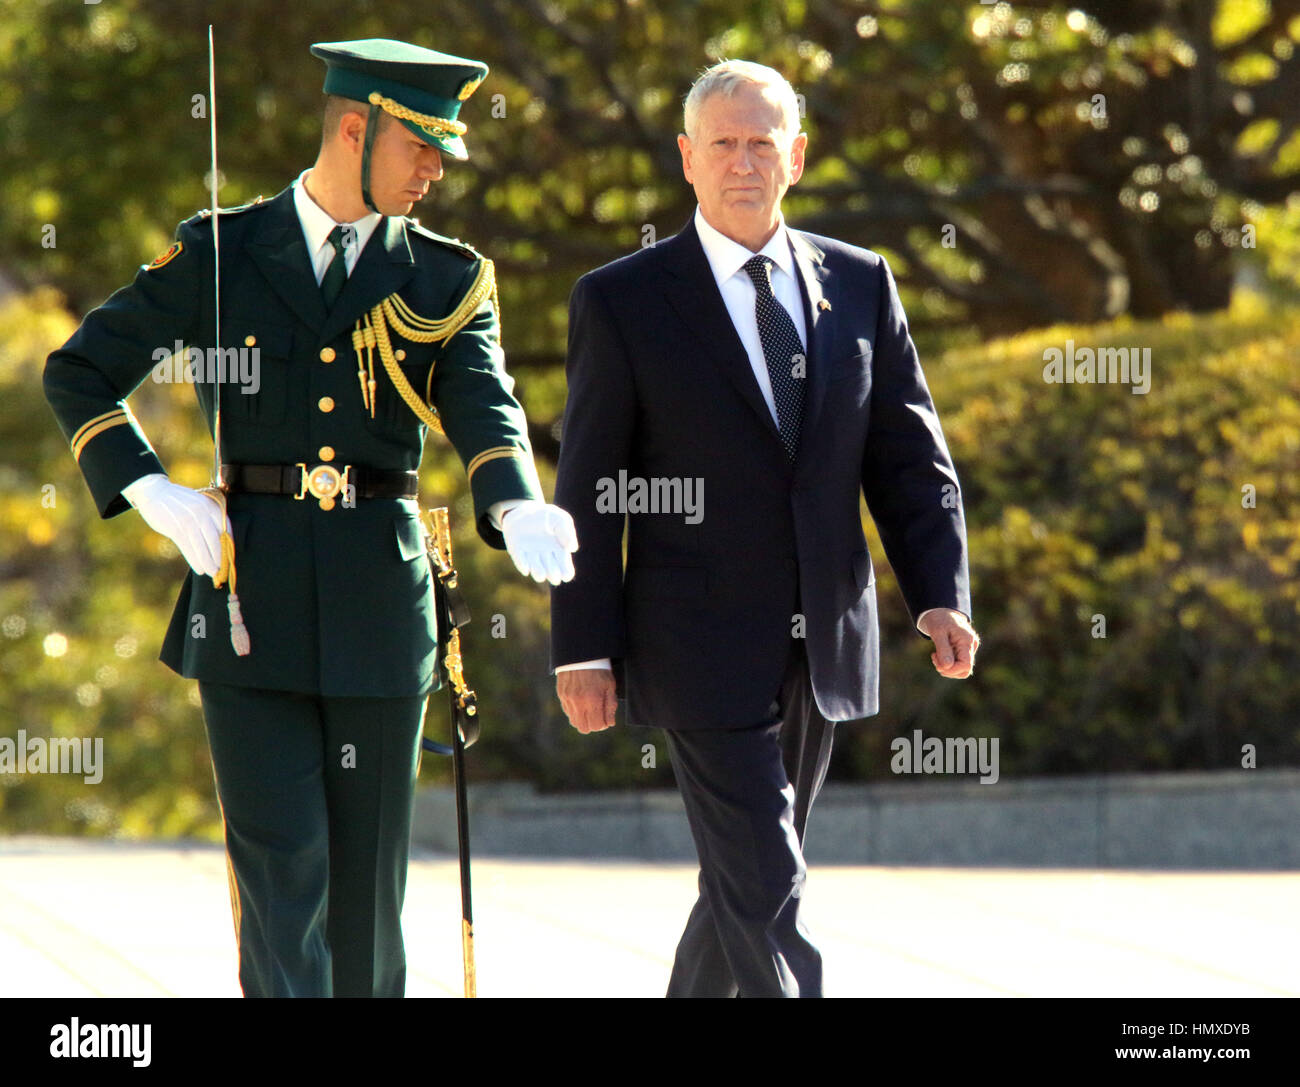 Tokyo, Japan. 4th Feb, 2017. Newly apponited U.S. Secretary of Defense James Mattis (R) reviews the honor guards at the Defense Ministry in Tokyo on Saturday, February 4, 2017. Mattis is now here on his east Asian trip to exchange views with Japanese officials. Credit: Yoshio Tsunoda/AFLO/Alamy Live News Stock Photo